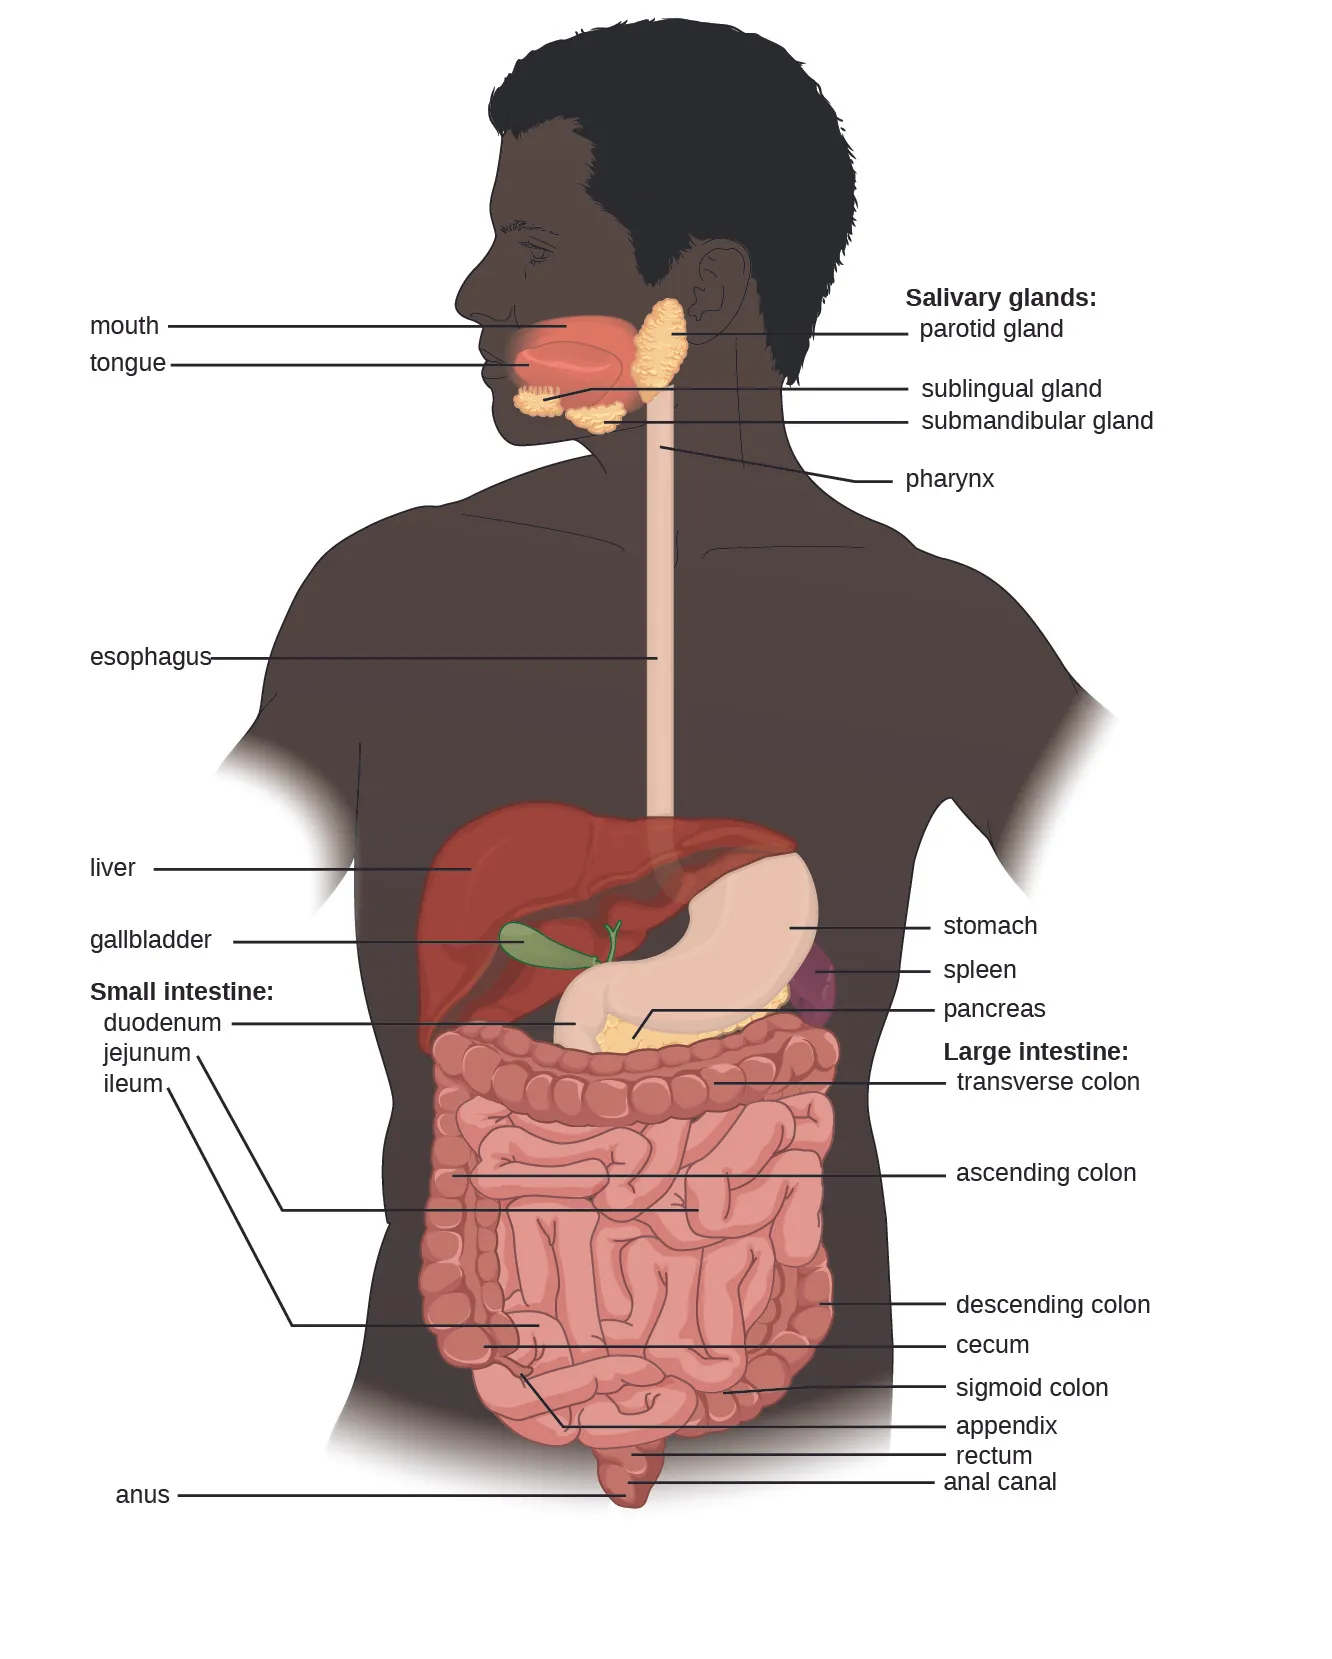 Diagram of the digestive system. The system begins with the mouth and tongue. There are salivary glands in this region: the sublingual gland is under the tongue, the submandibular gland is below the jaw and the parotid gland is in the very back of the mouth. The mouth leads to the pharynx (a tube) that leads to the esophagus, that leads to the stomach, that leads to the small intestines. The small intestine is divided into 3 regions: first is the duodenum, next is the jejunim and finally the ileum. This leads to the large intestines which is divided into  regions: first the cecum, then the ascending colon, then the transverse colon, then the descending colon, then the sigmoid colon, and finally the rectum, anal canal and anus.  The appendix is a small projection off the cecum. Also part of the digestive system is the large liver (above and to the right of the stomach), the gallbladder (a small sac under the liver), the pancrease (a structure below and behind the stomach) and the spleen (a structure below and to the left of the stomach).